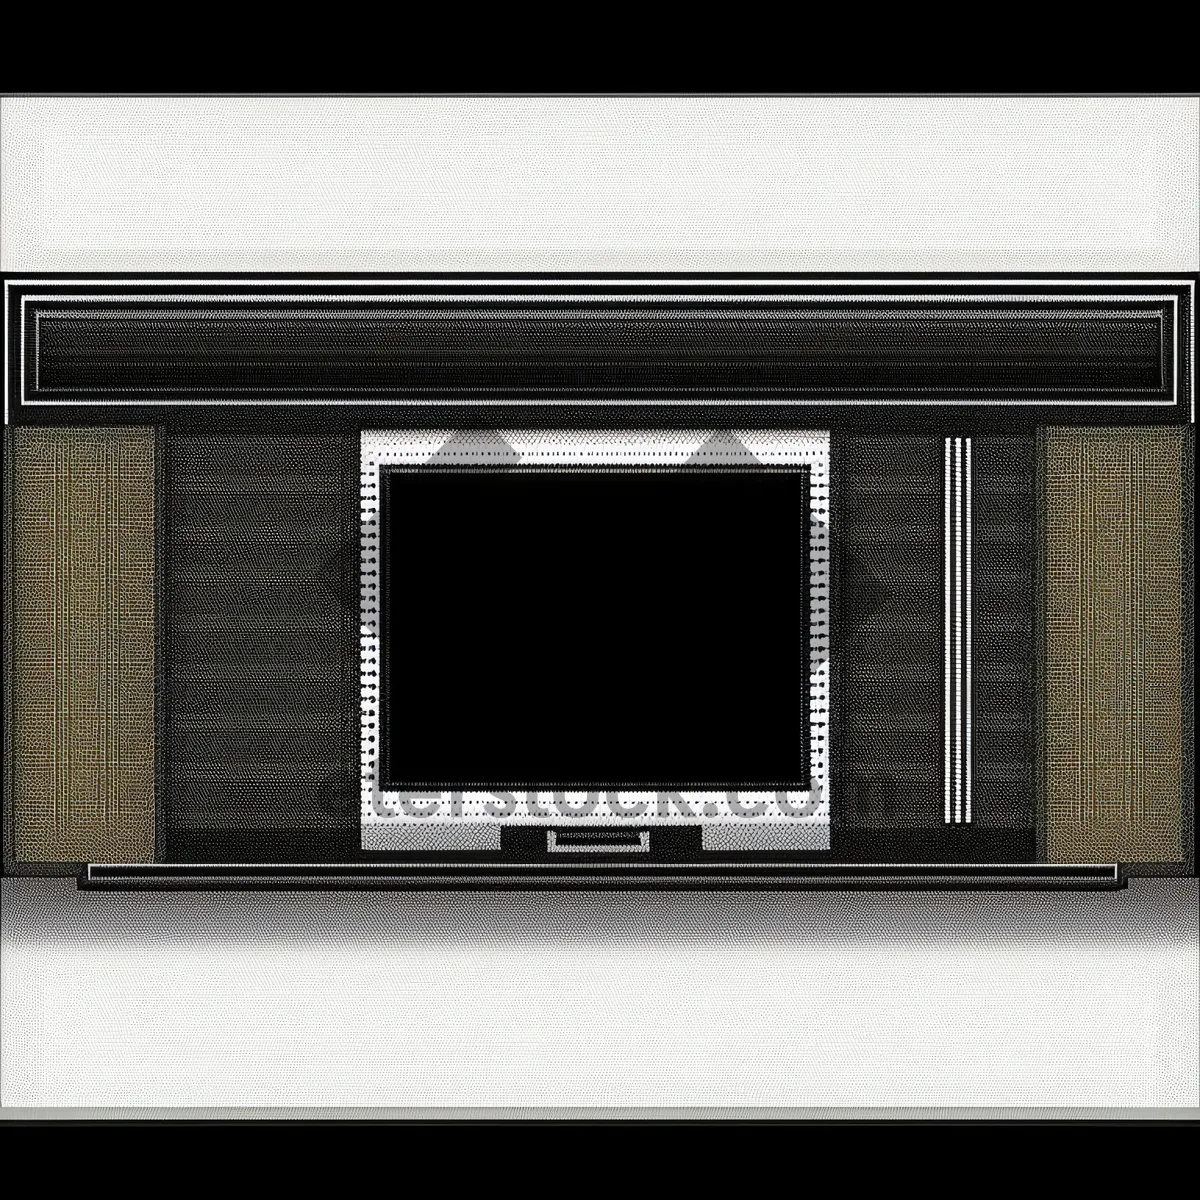 Picture of Retro Microwave with Modern Display Screen